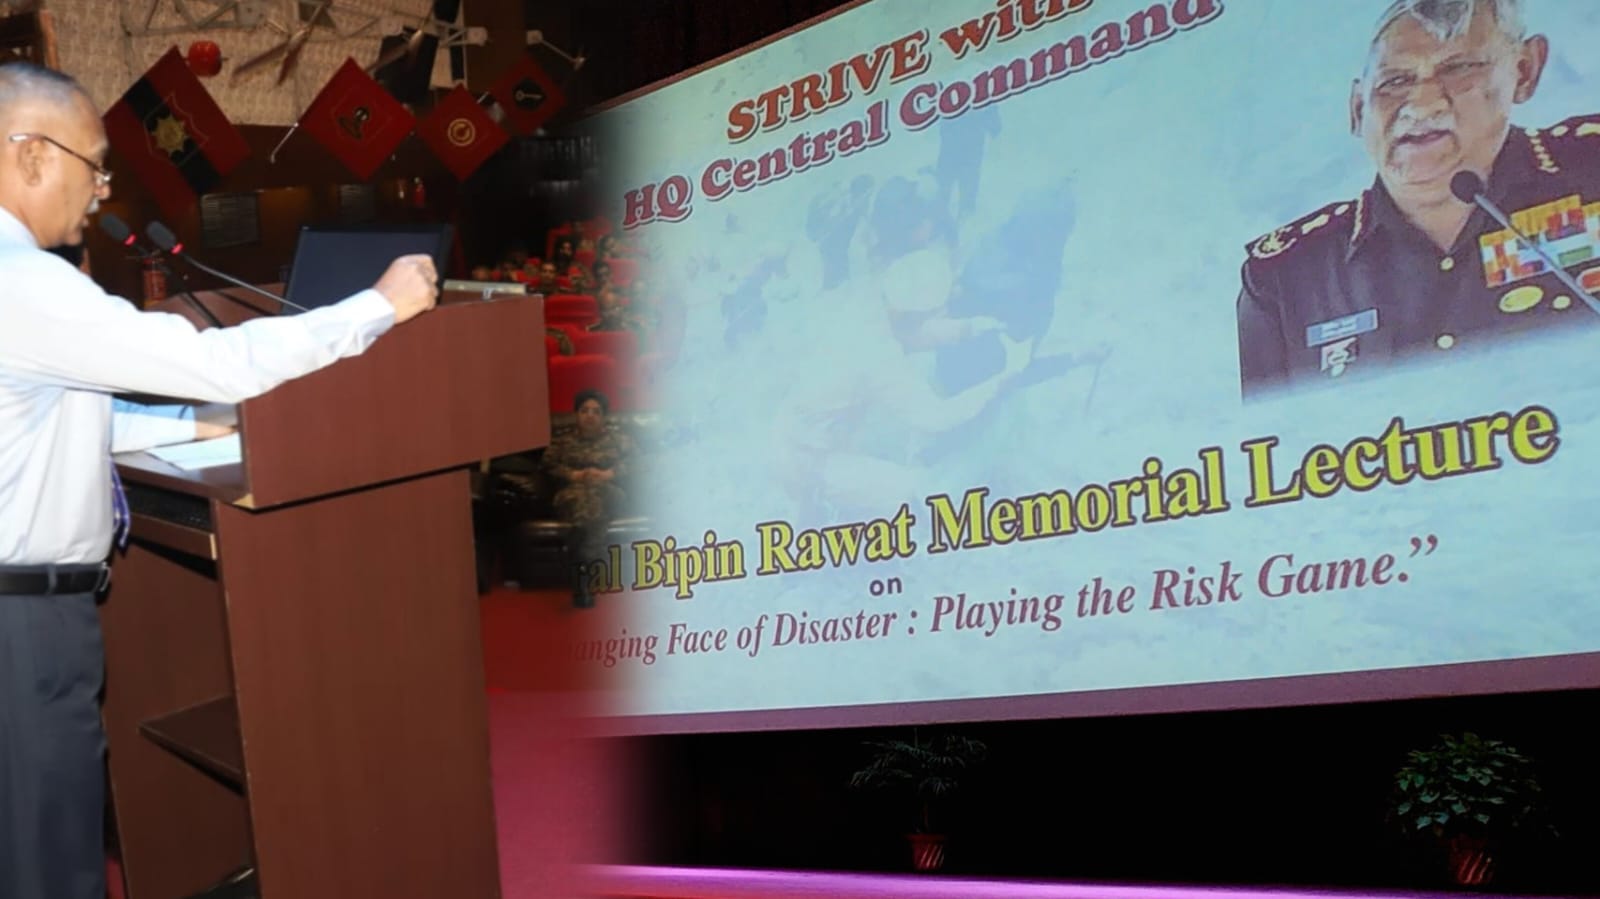 Third Late General Bipin Rawat Memorial Lecture  “Changing Face of Disaster: Playing the Risk Game’ by Team STRIVE